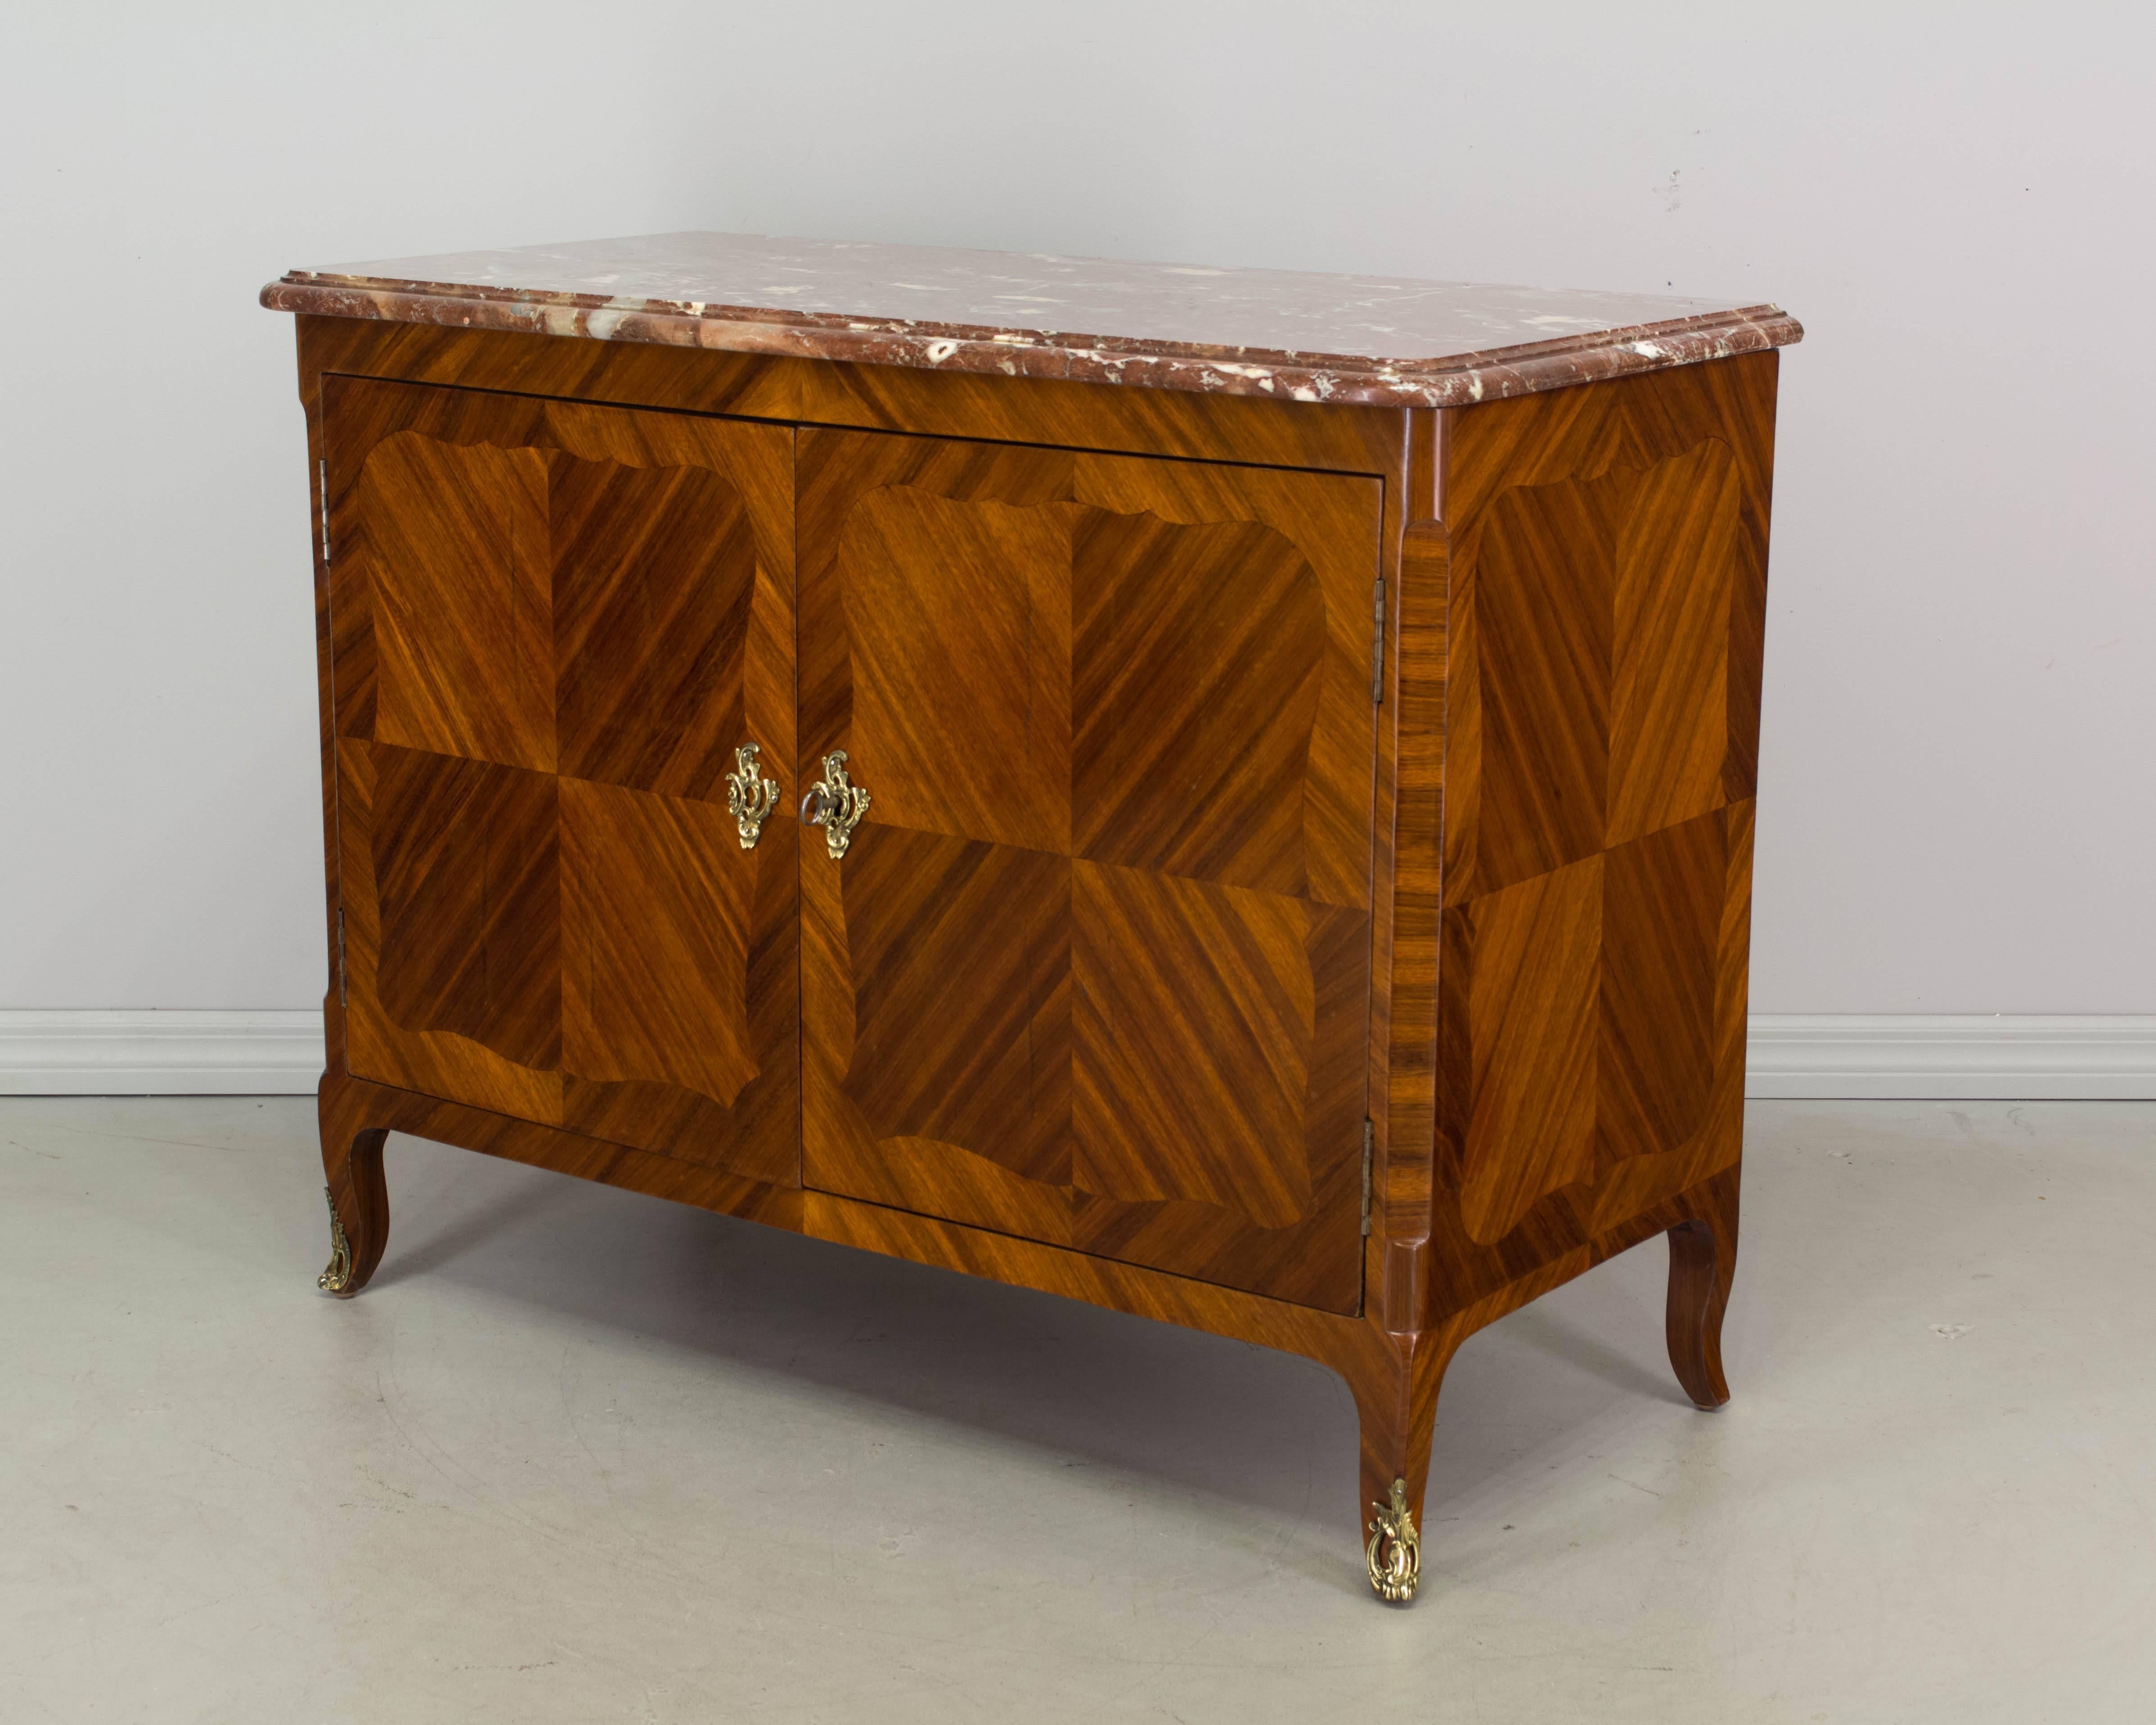 An elegant 19th century Louis XV style Parisian marquetry buffet, finely crafted with bookmatched veneer of mahogany and French polish finish. Beautiful original Rouge Royal marble top. Original bronze hardware with working lock and key. Nice